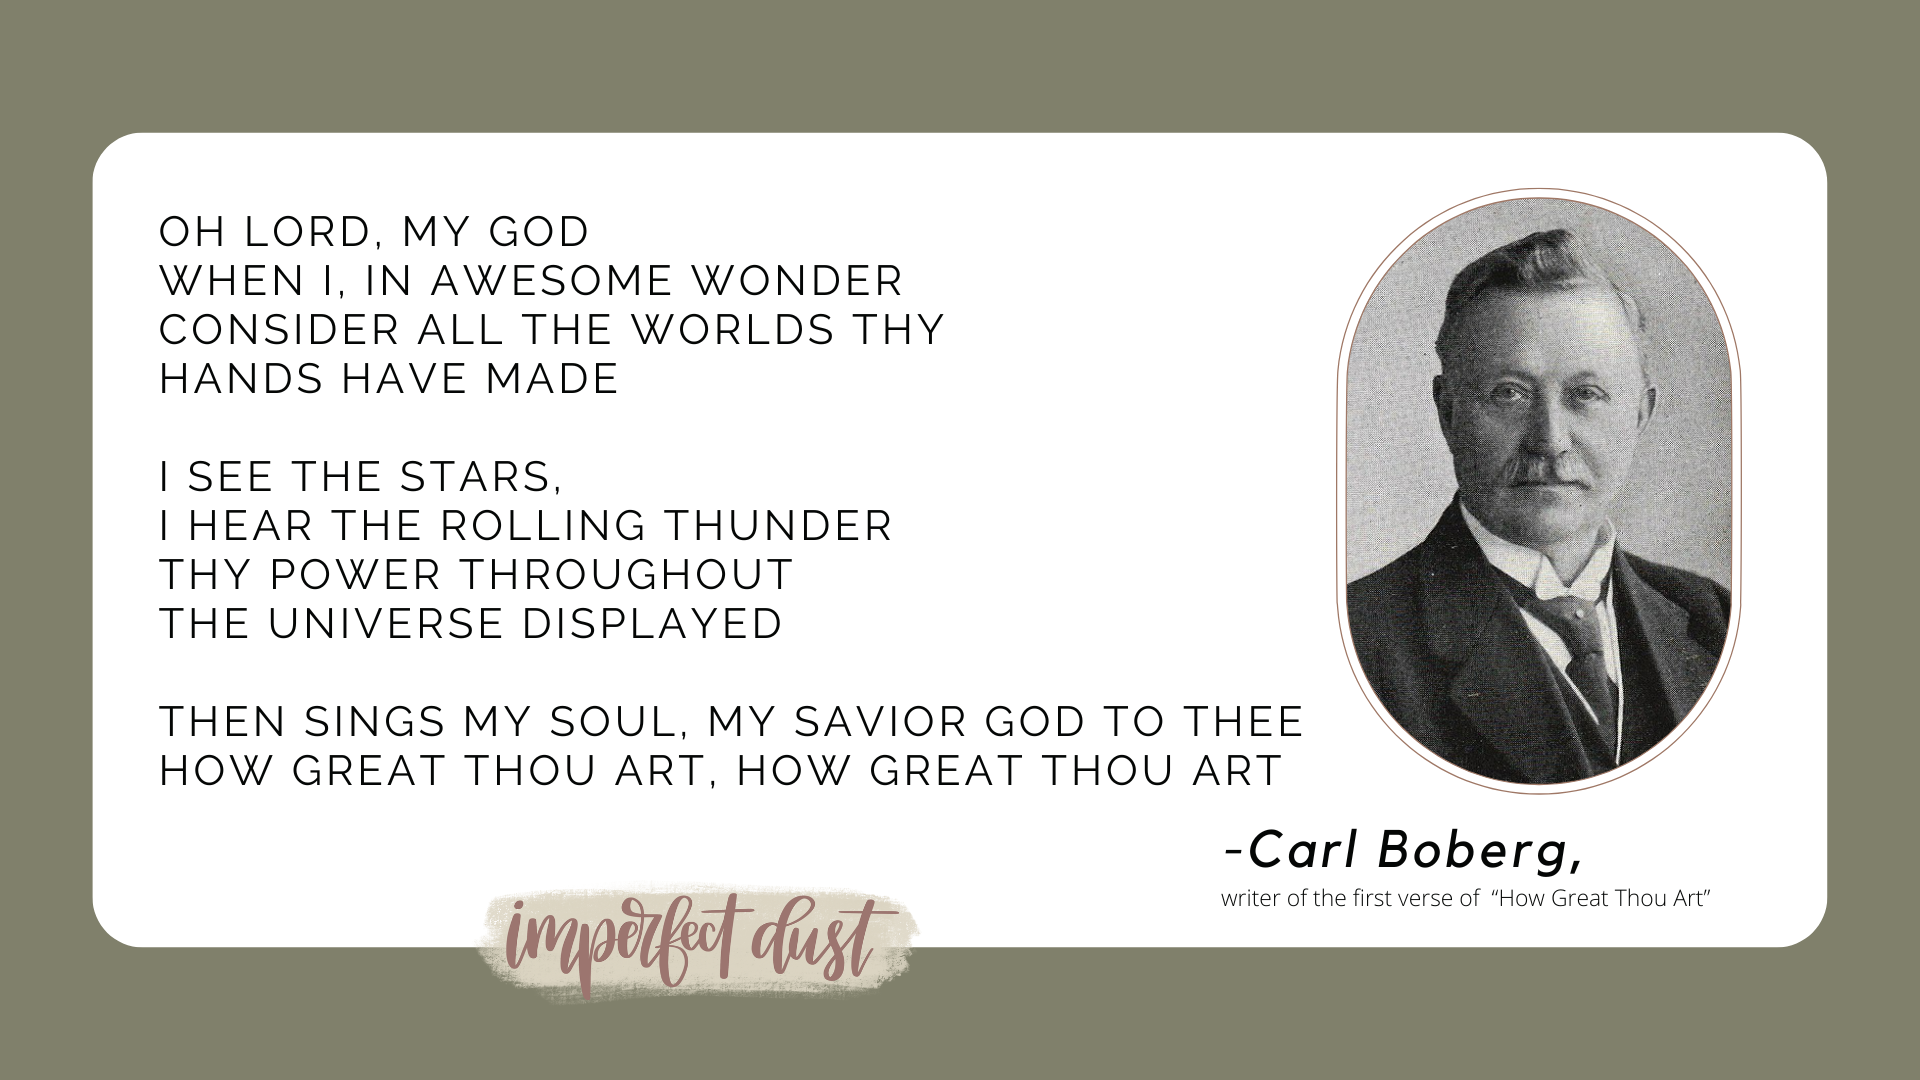 Carl Boberg wrote the first portion of the classic hymn How Great Thou Art